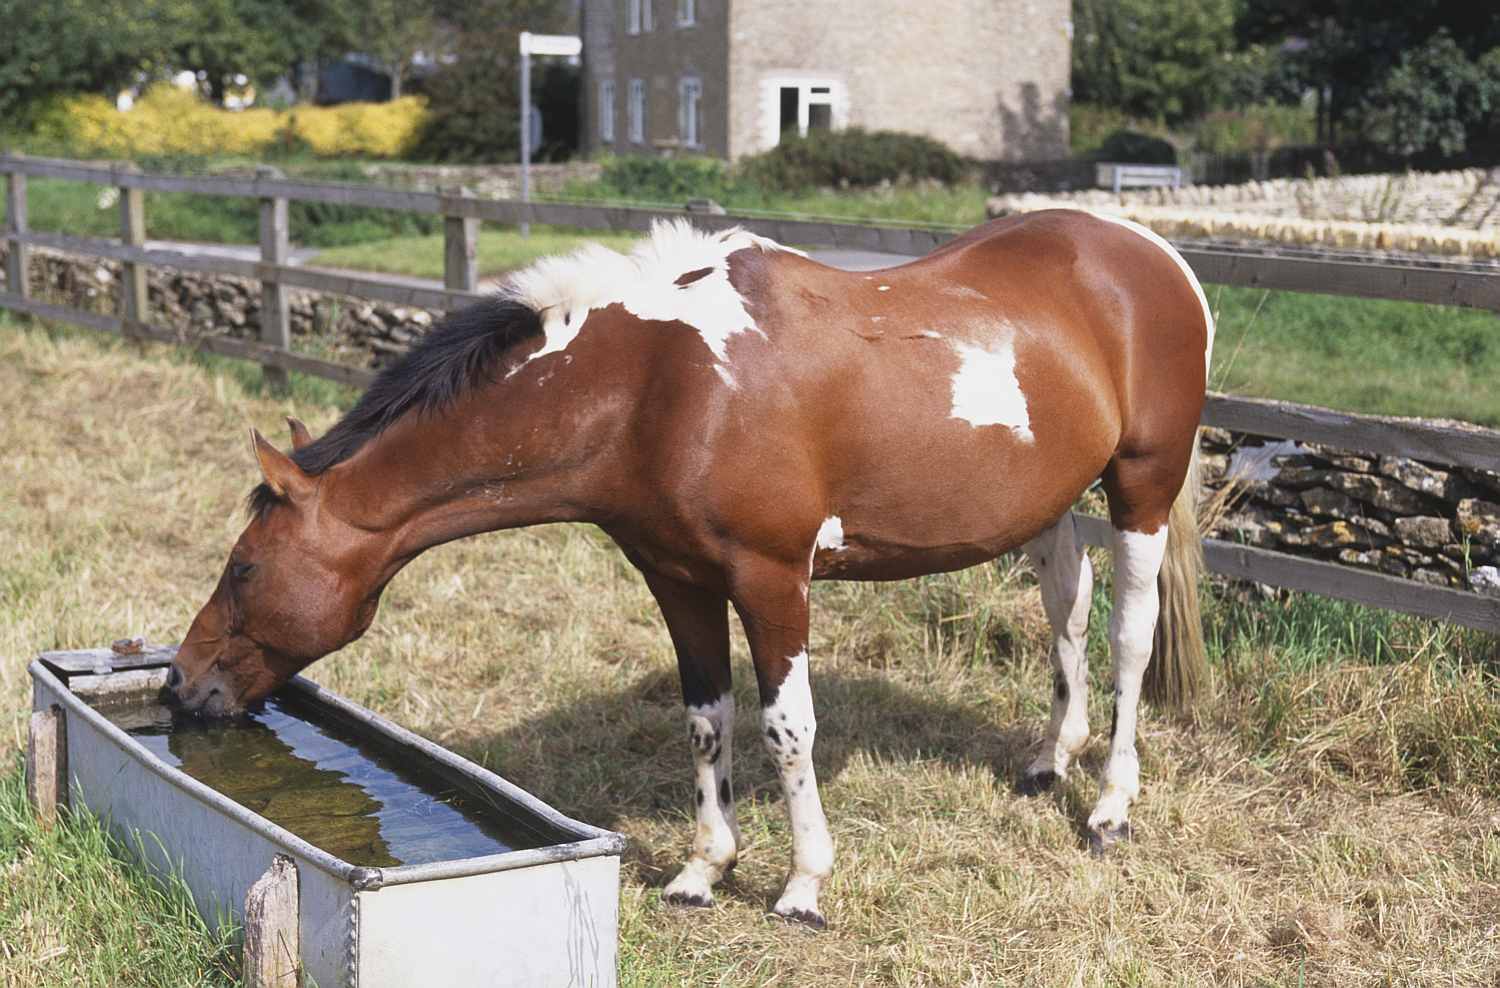 Horse drinking from a water trough